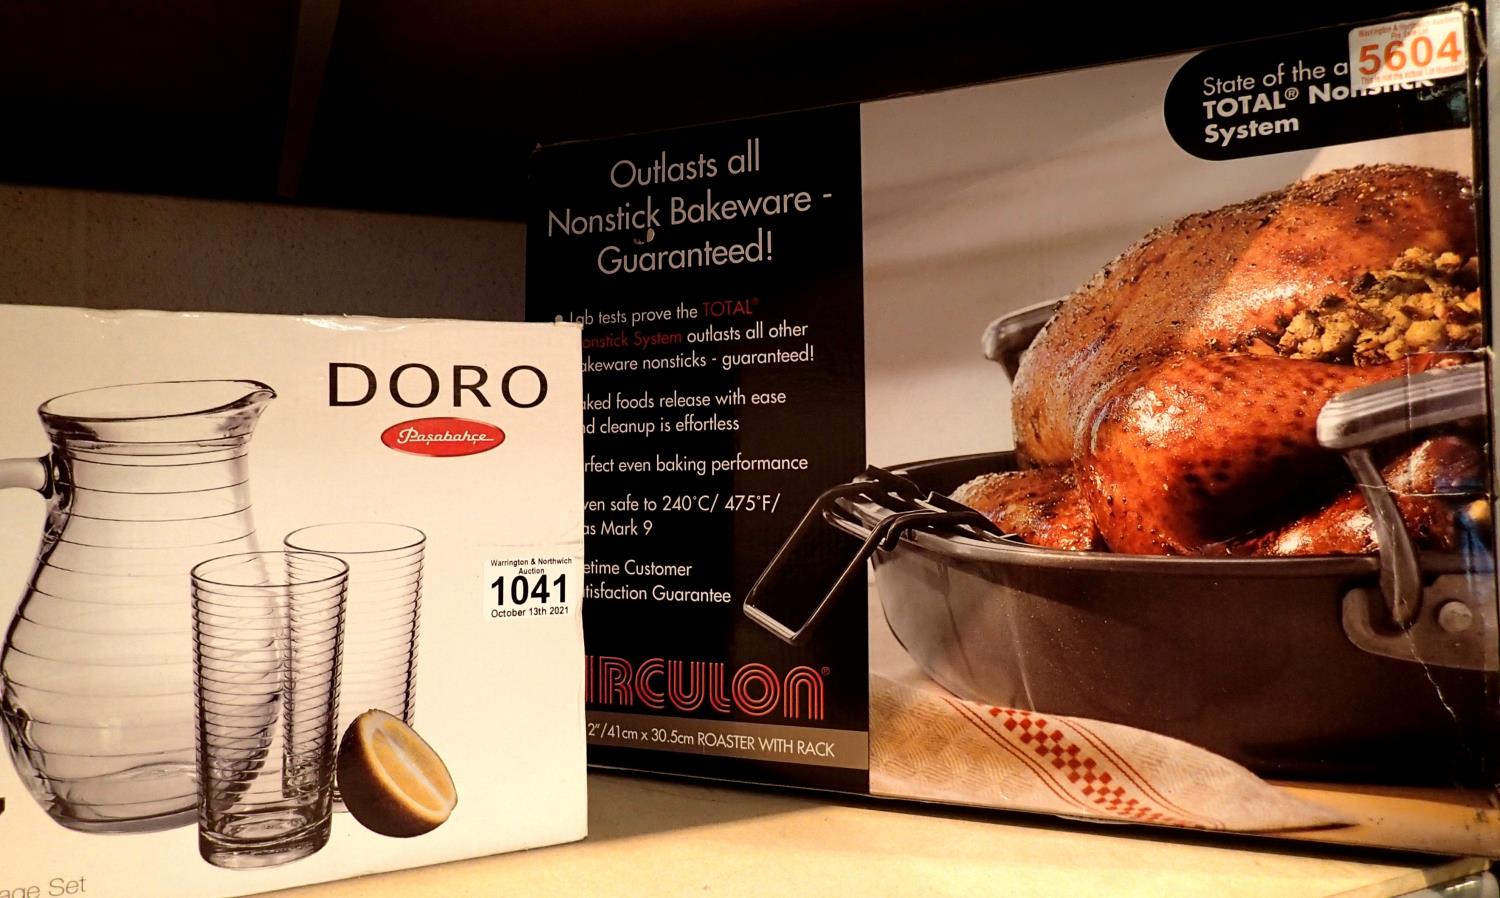 Doro seven piece glass beverage set, a boxed Circulon roasting dish with rack and an IKEA desk top